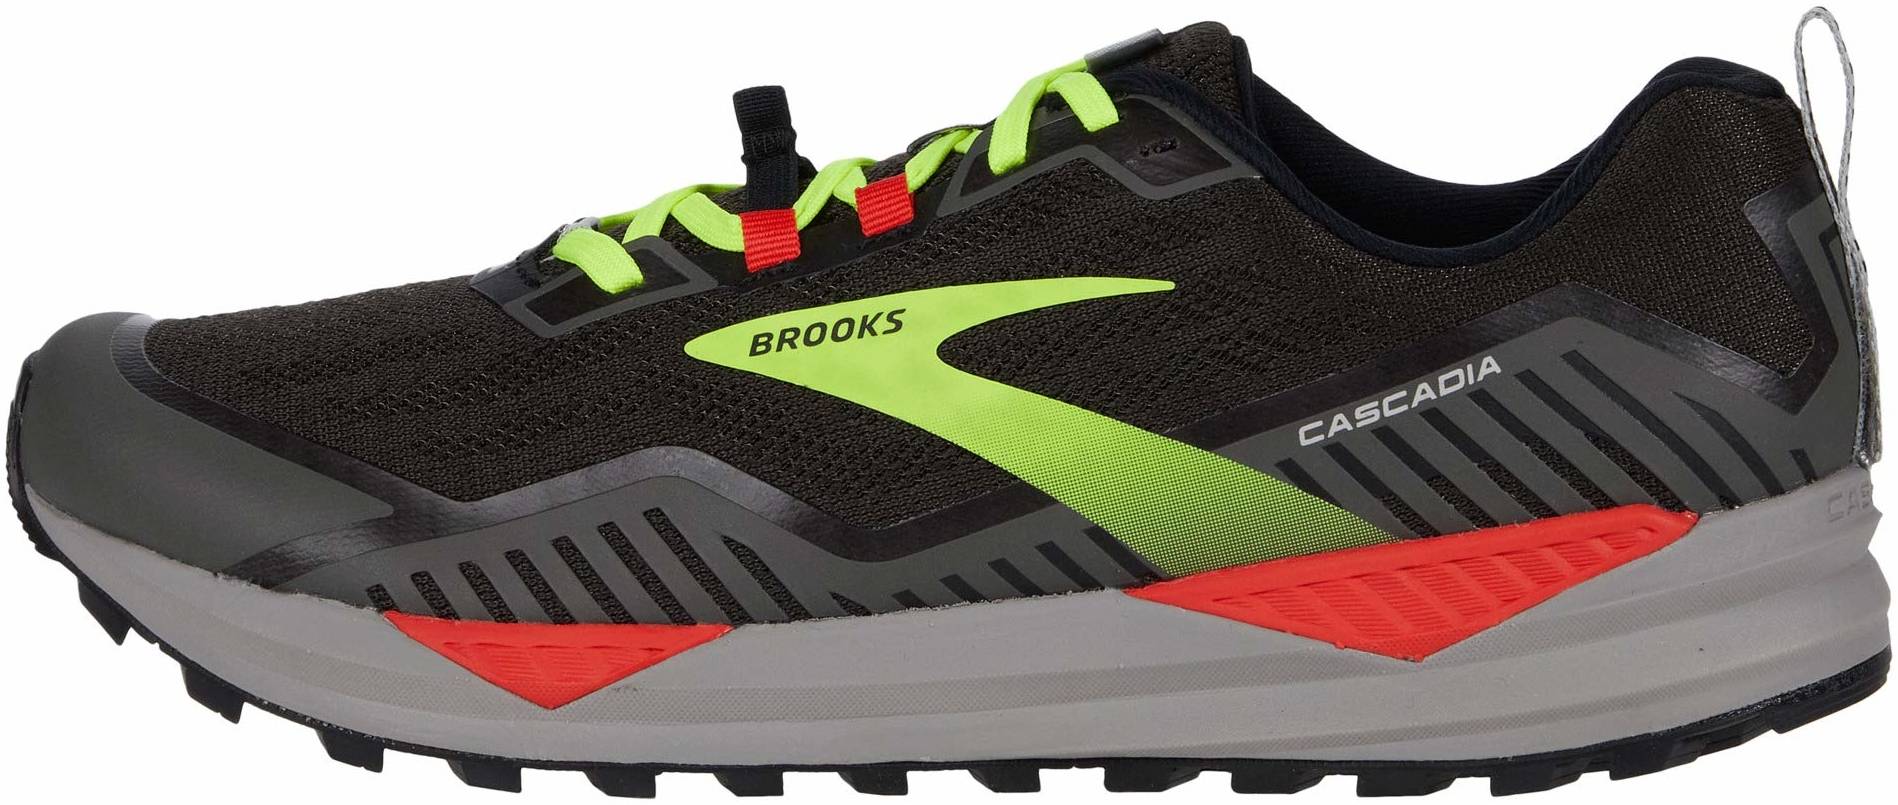 Review of Brooks Cascadia 15 